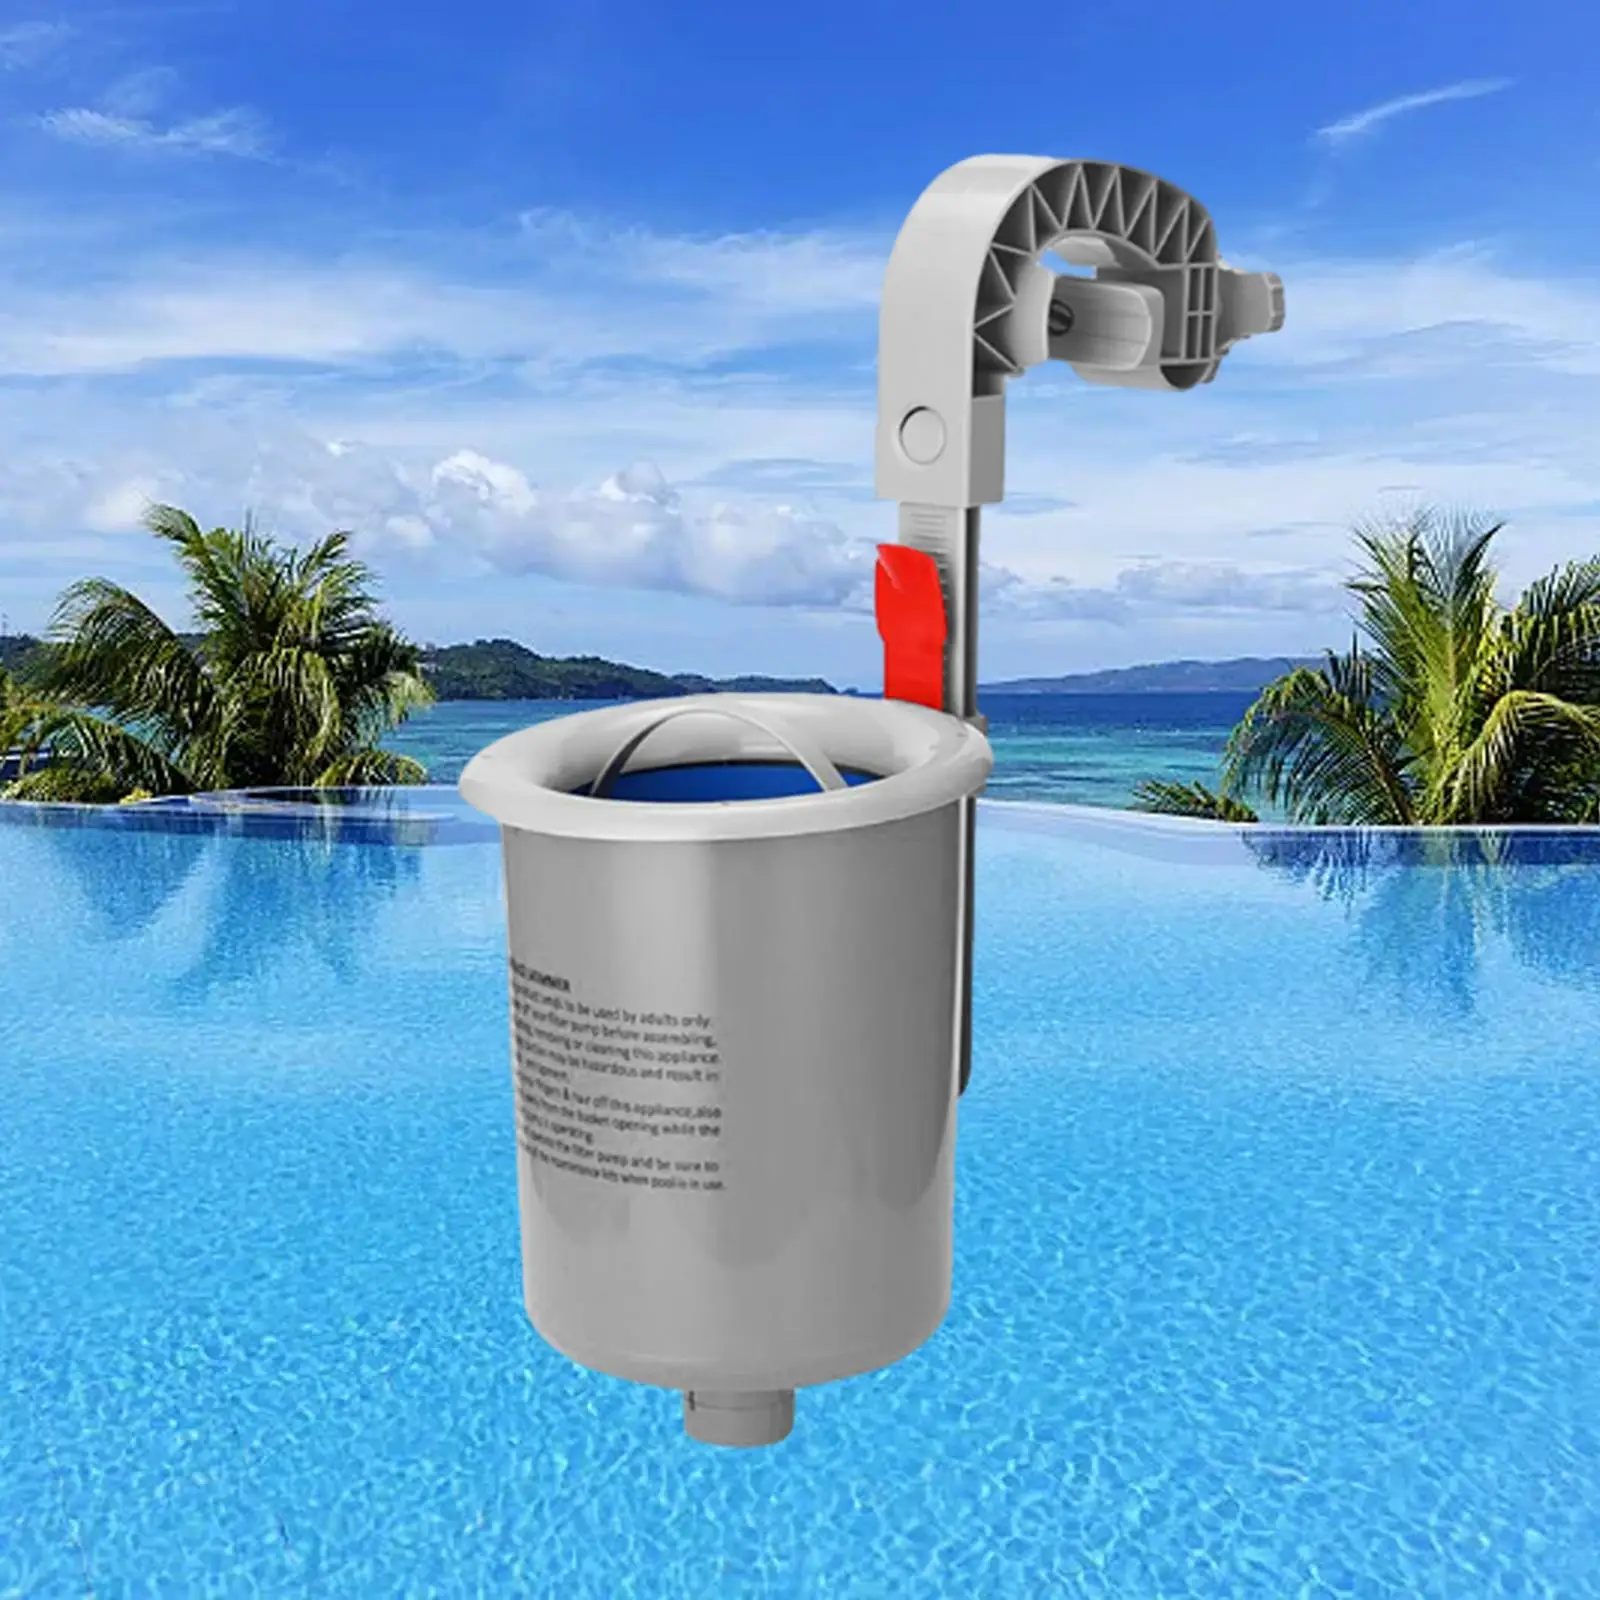 Pond Skimmer Kits Wall Mount Floating Pool Filter Easy to Install Pool Maintenance Cleaner Durable above Ground Pool Skimmer